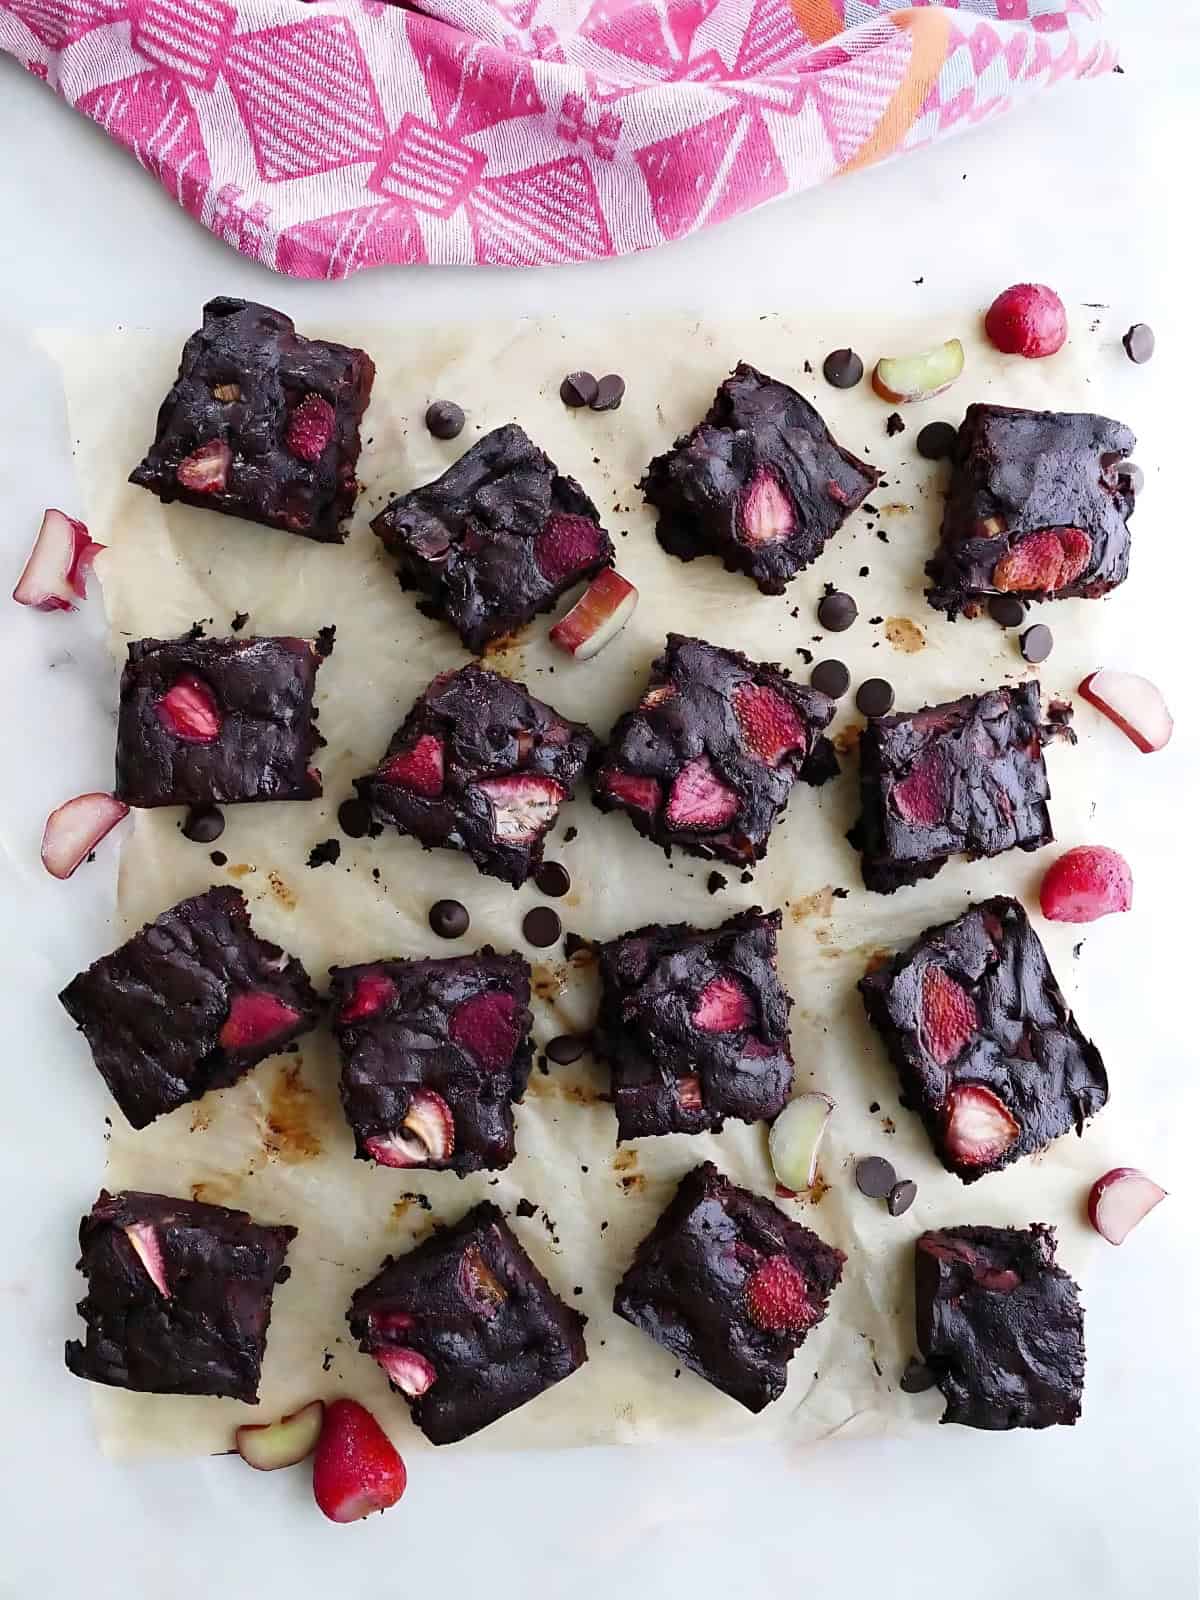 Double chocolate rhubarb brownies on a baking paper.